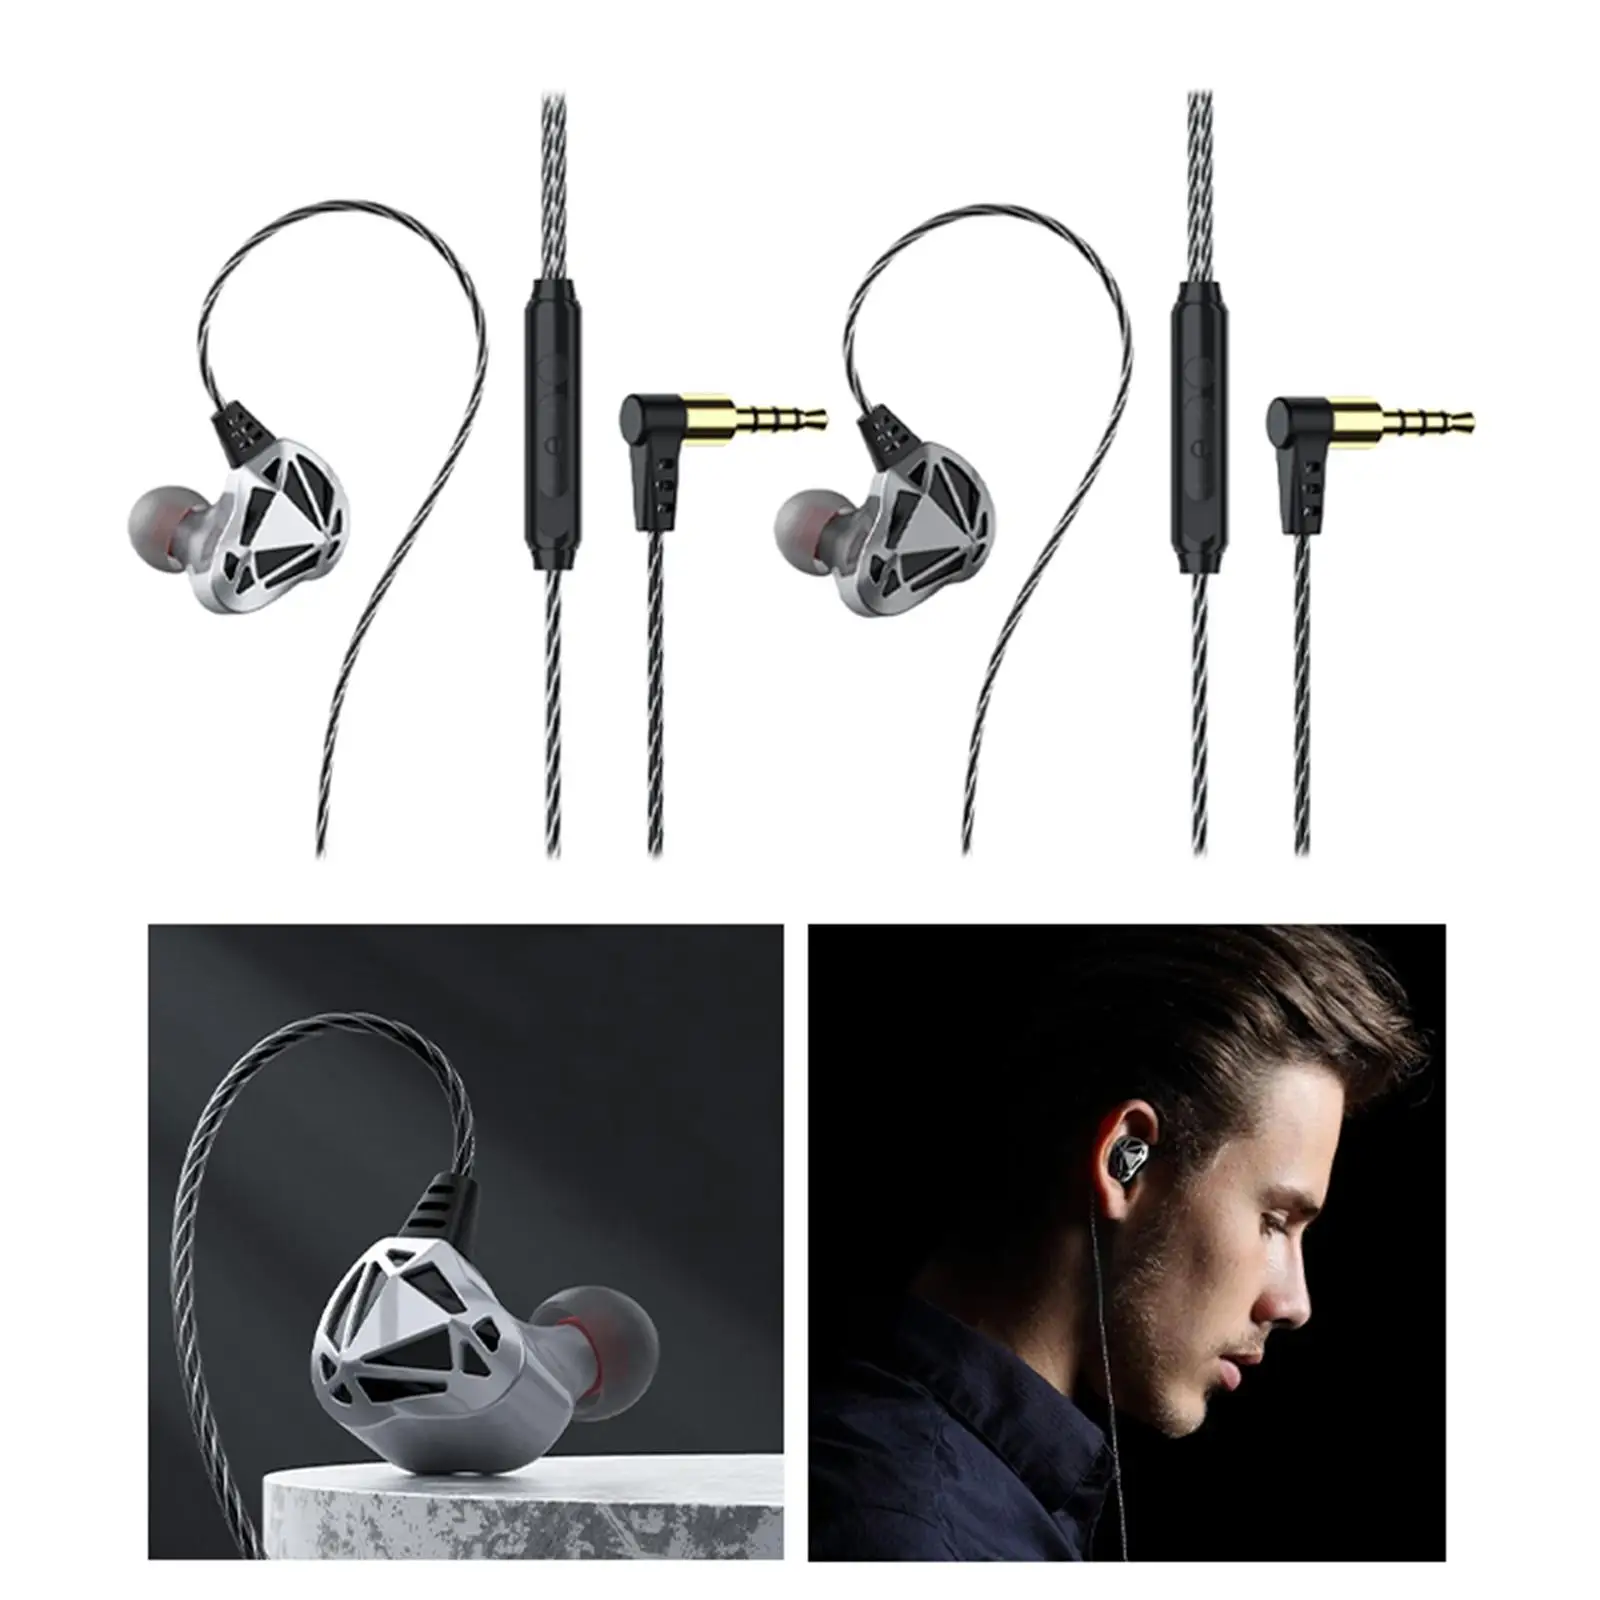 Earphones Wired 3.5mm Plug Jack with Mic Comfort wearing Sports Earbuds for Exercise Gym